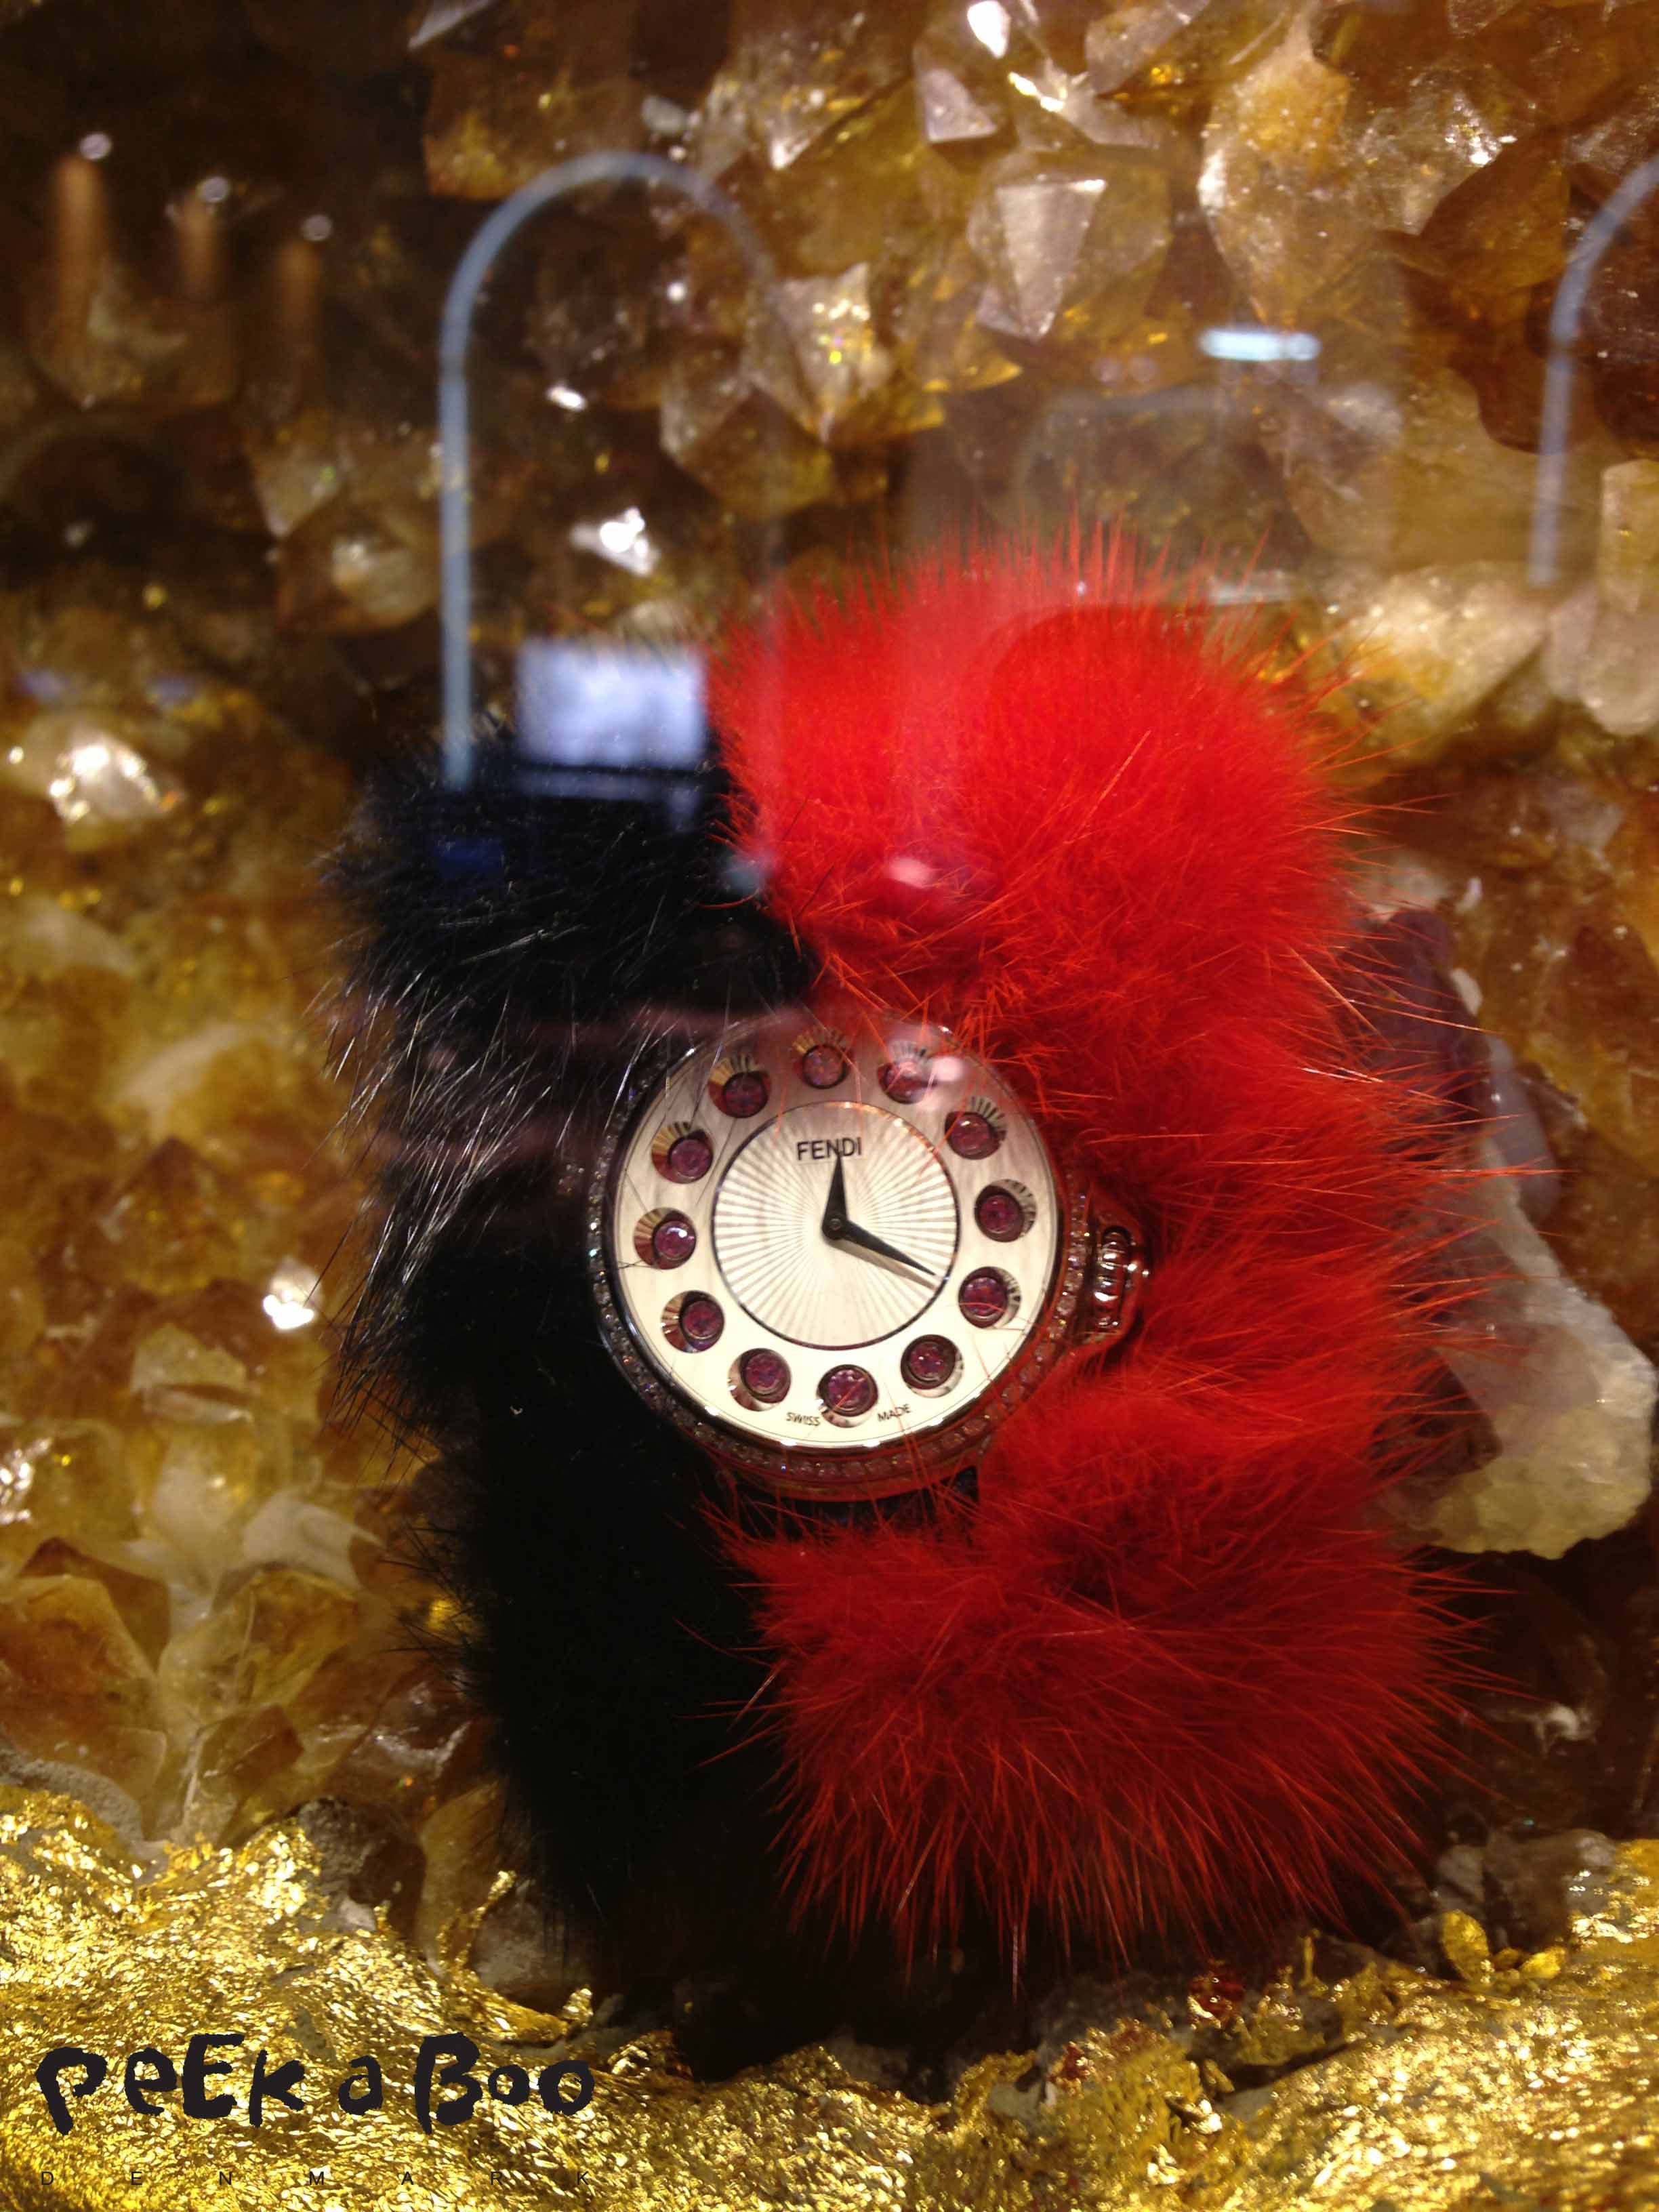 Fendi Watch with mink fur strap. AW 14 Collection presented in beautiful stone Cages built in the walls.